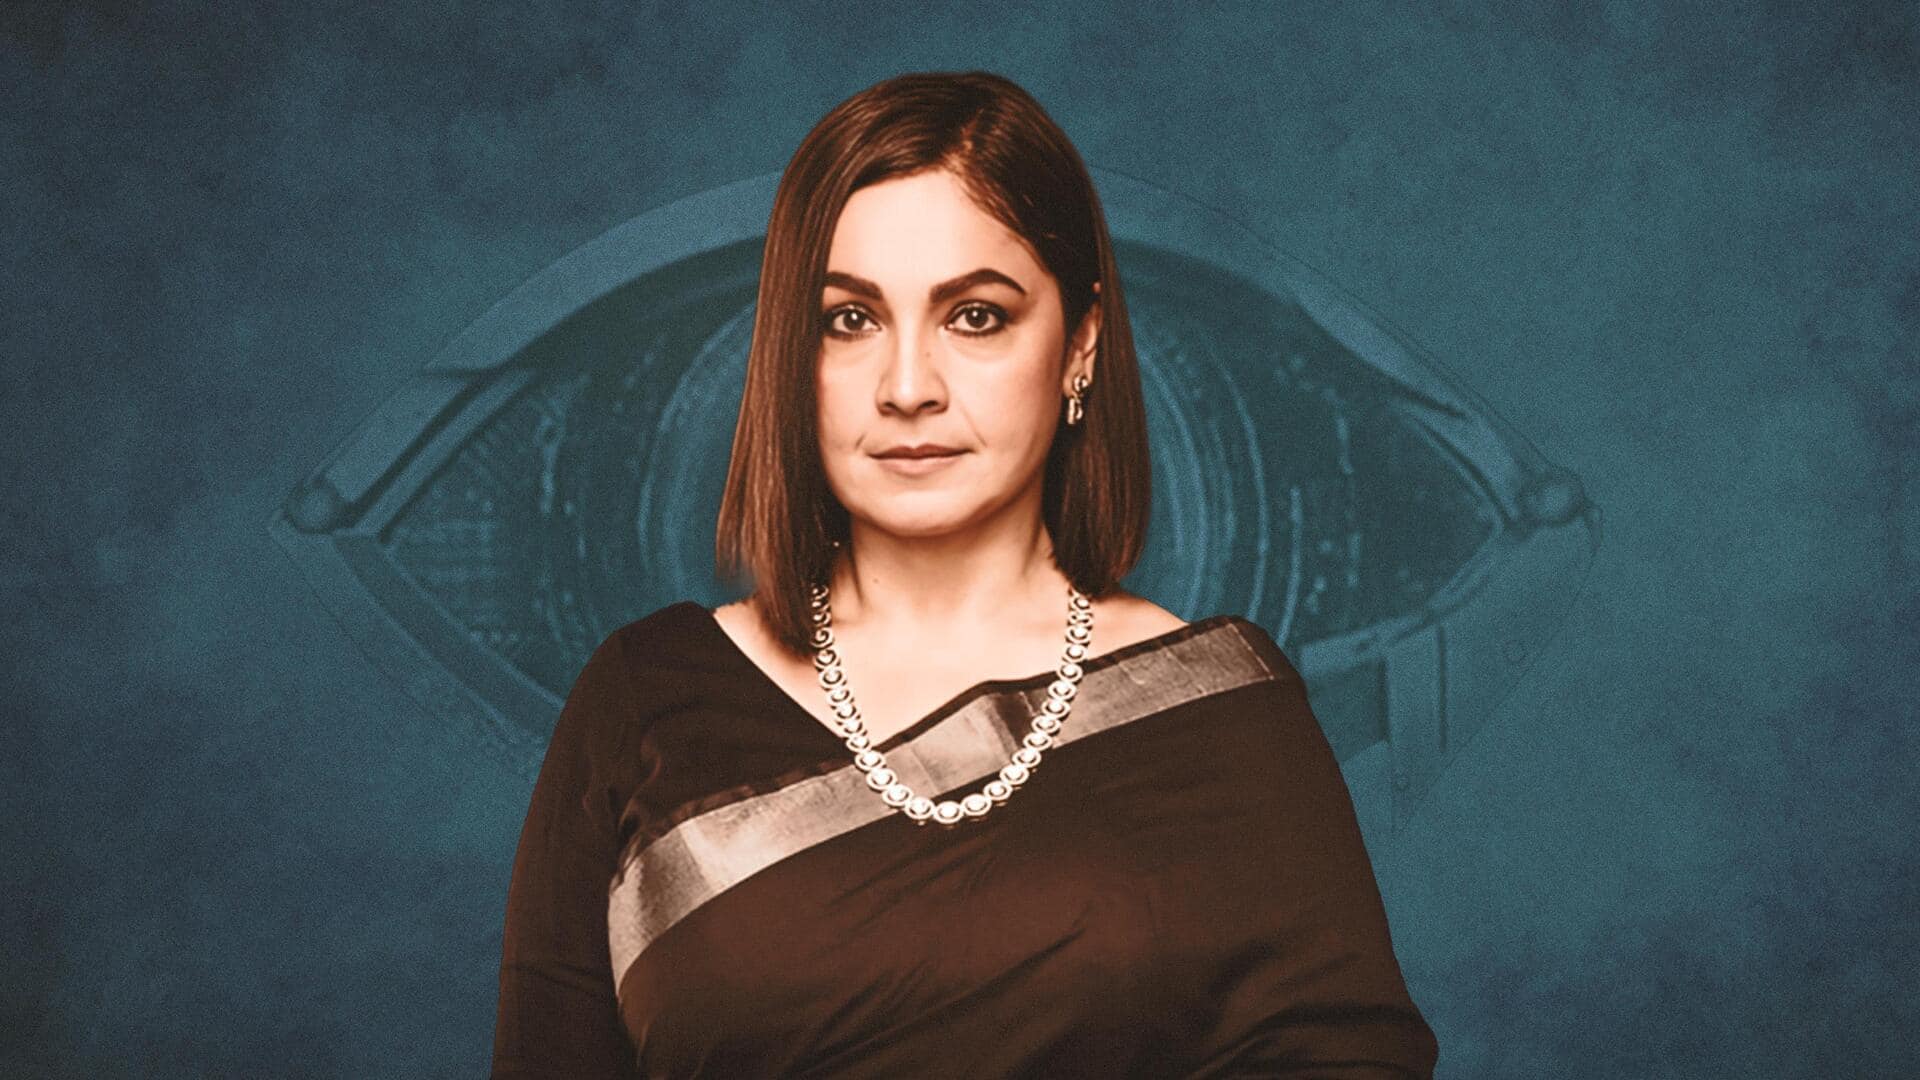 #BiggBossOTT2: Why Pooja Bhatt is in limelight since Day 1